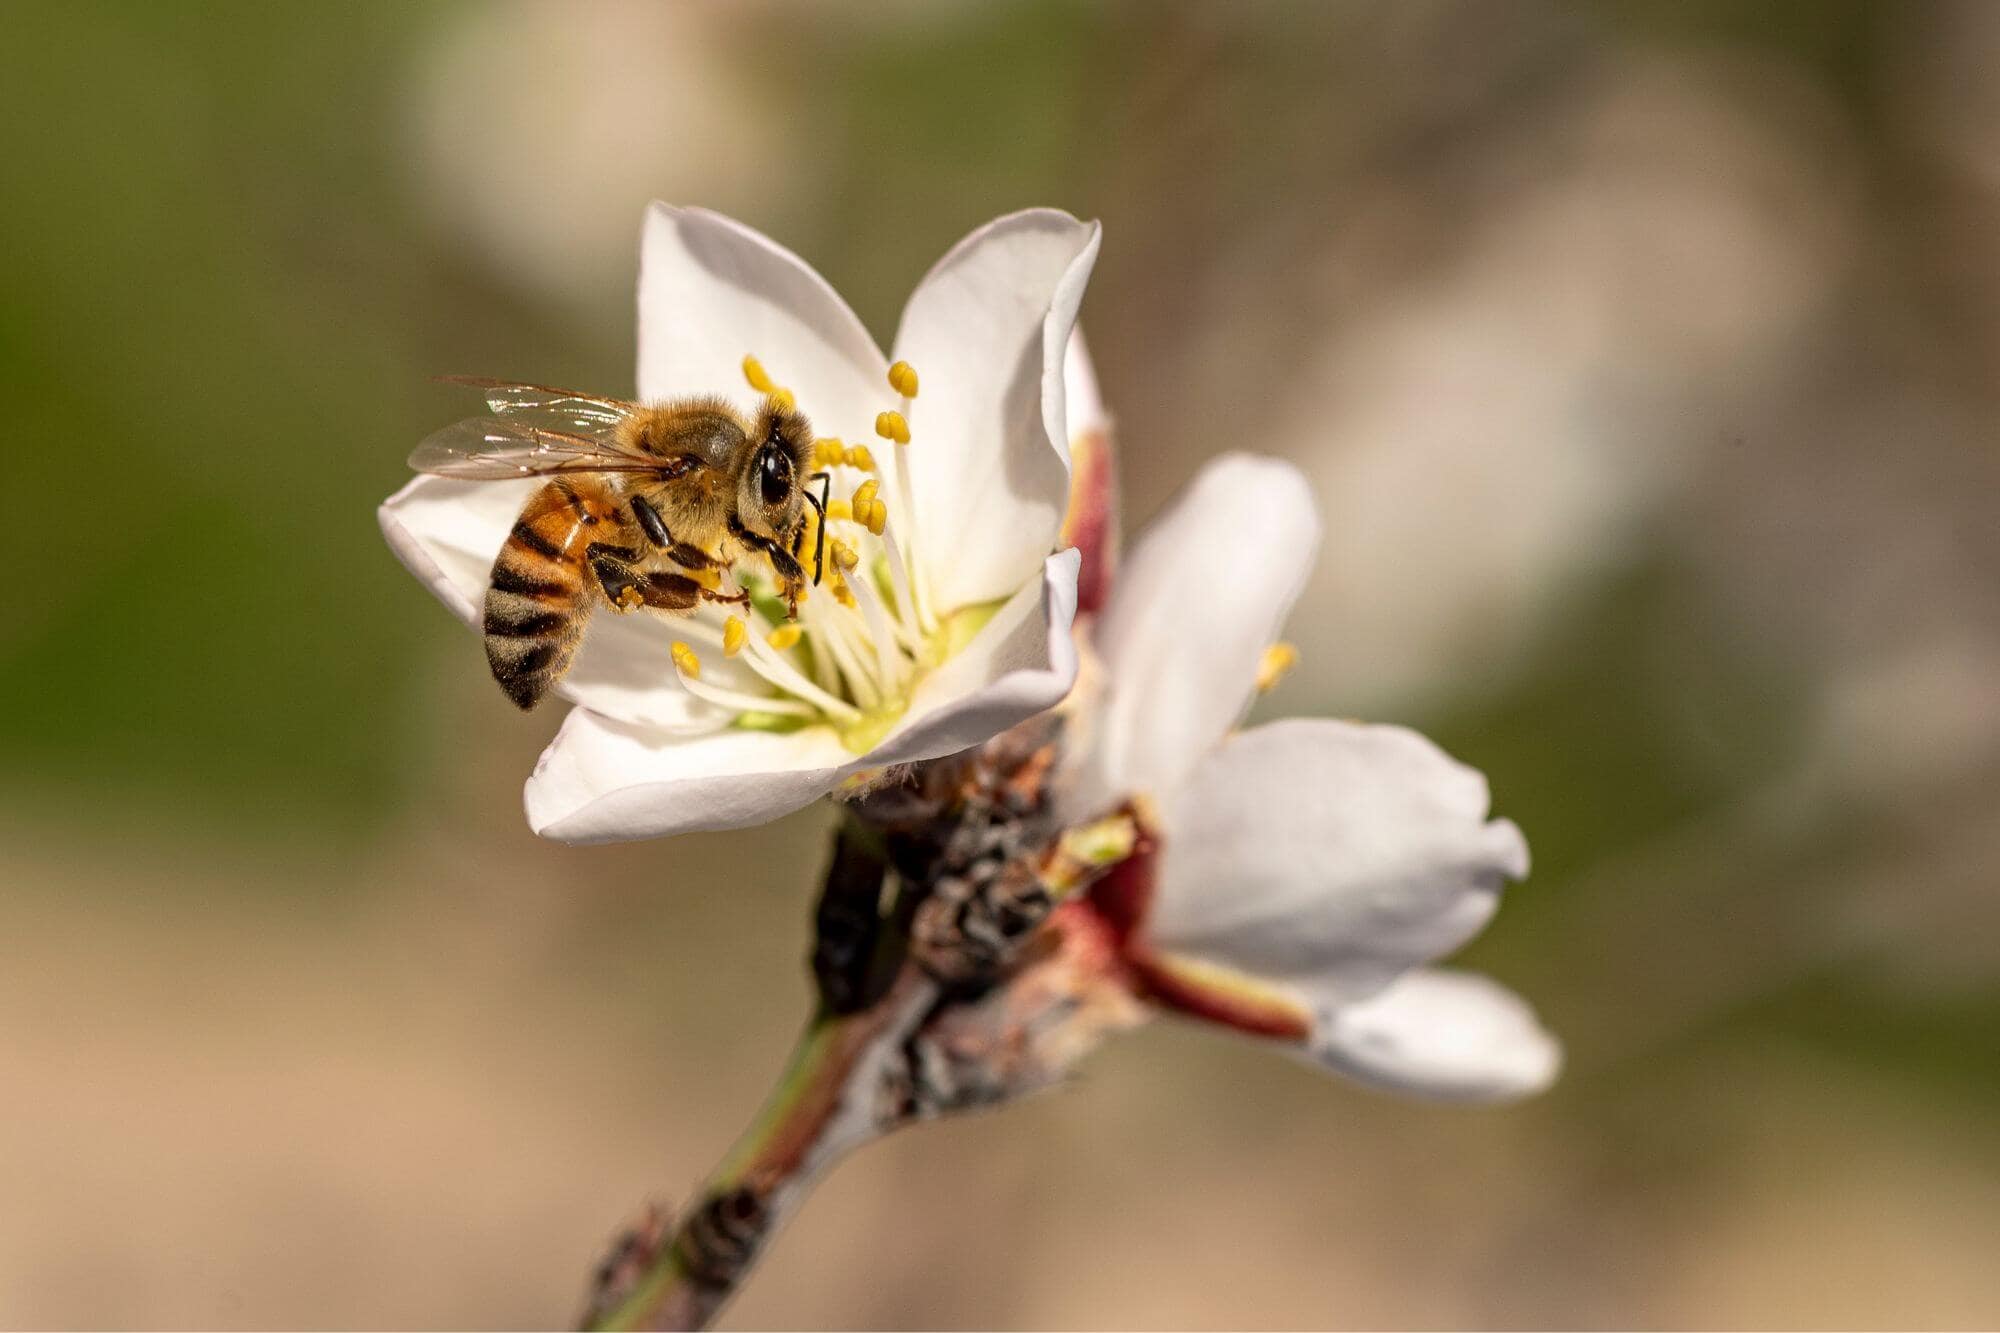 A single bee collecting pollen from an almond tree blossom